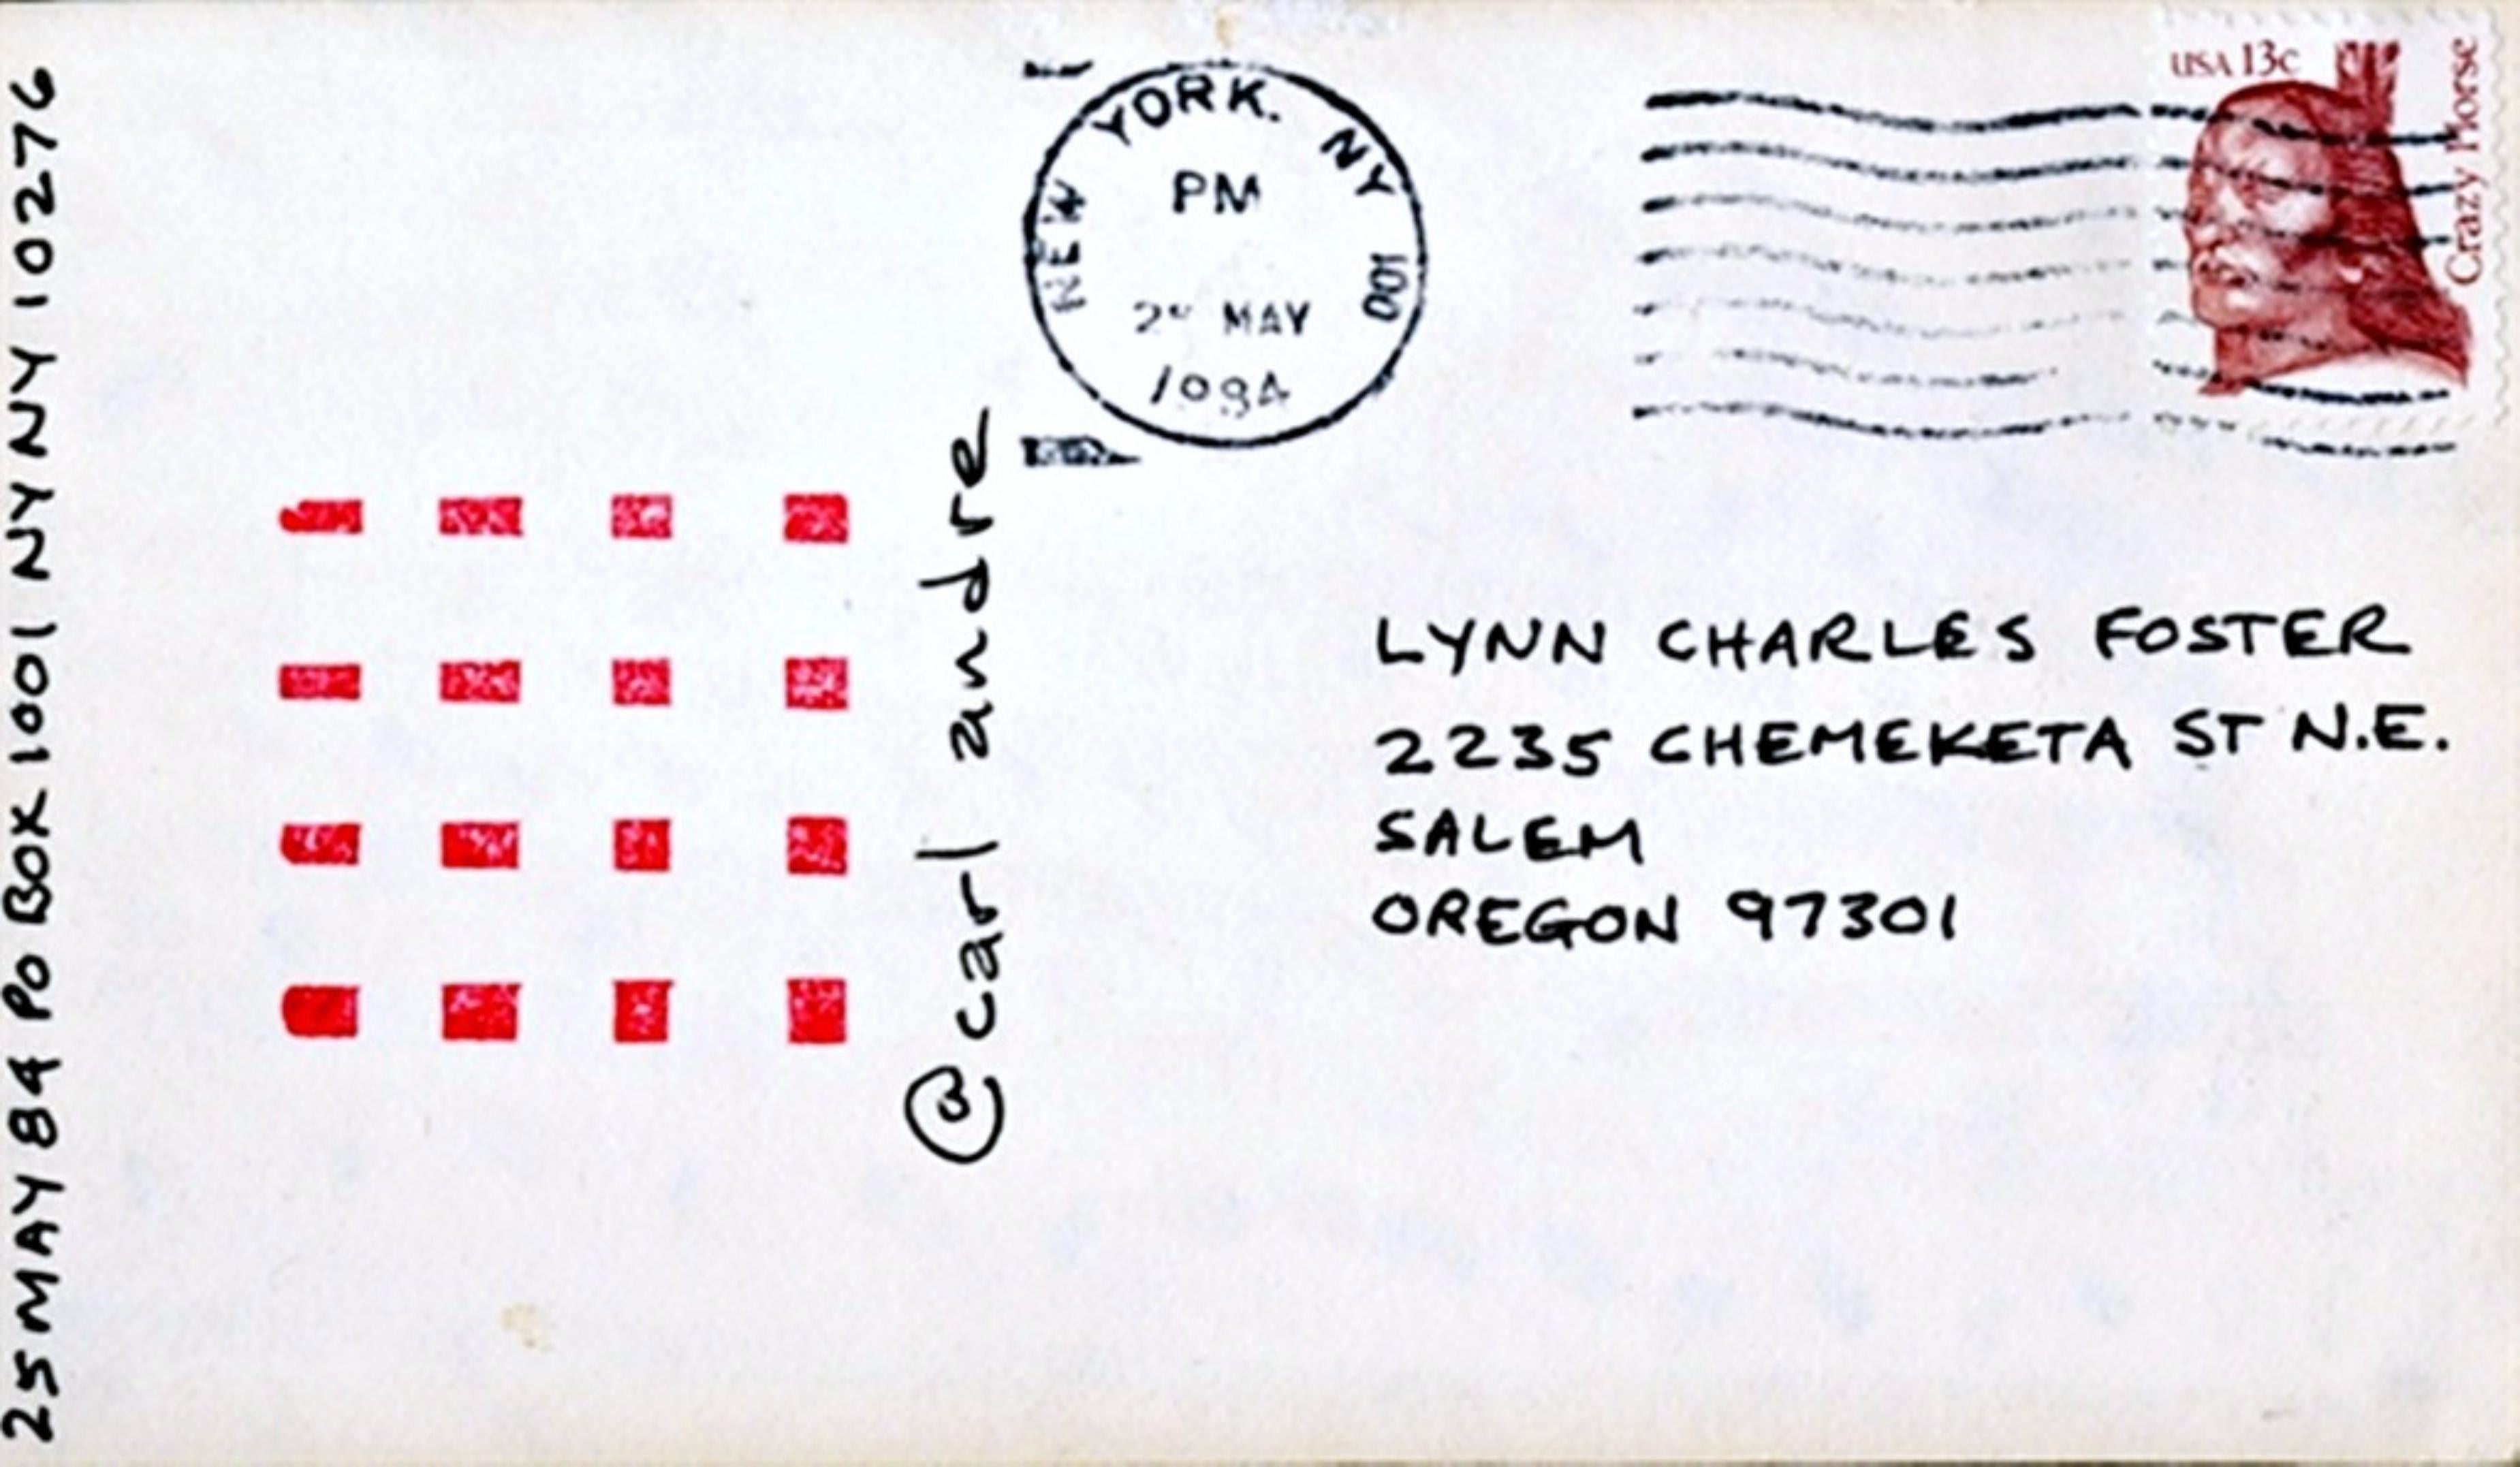 CARL ANDRE
Untitled Drawing, 1984
Felt tip pen, marker and stamp on Postmarked (franked) card to Lynn Charles Foster
3 3/5 × 6 1/10 inches
Hand-signed by artist, Hand signed by Carl Andre with his unique copyright, also hand addressed to the artist,